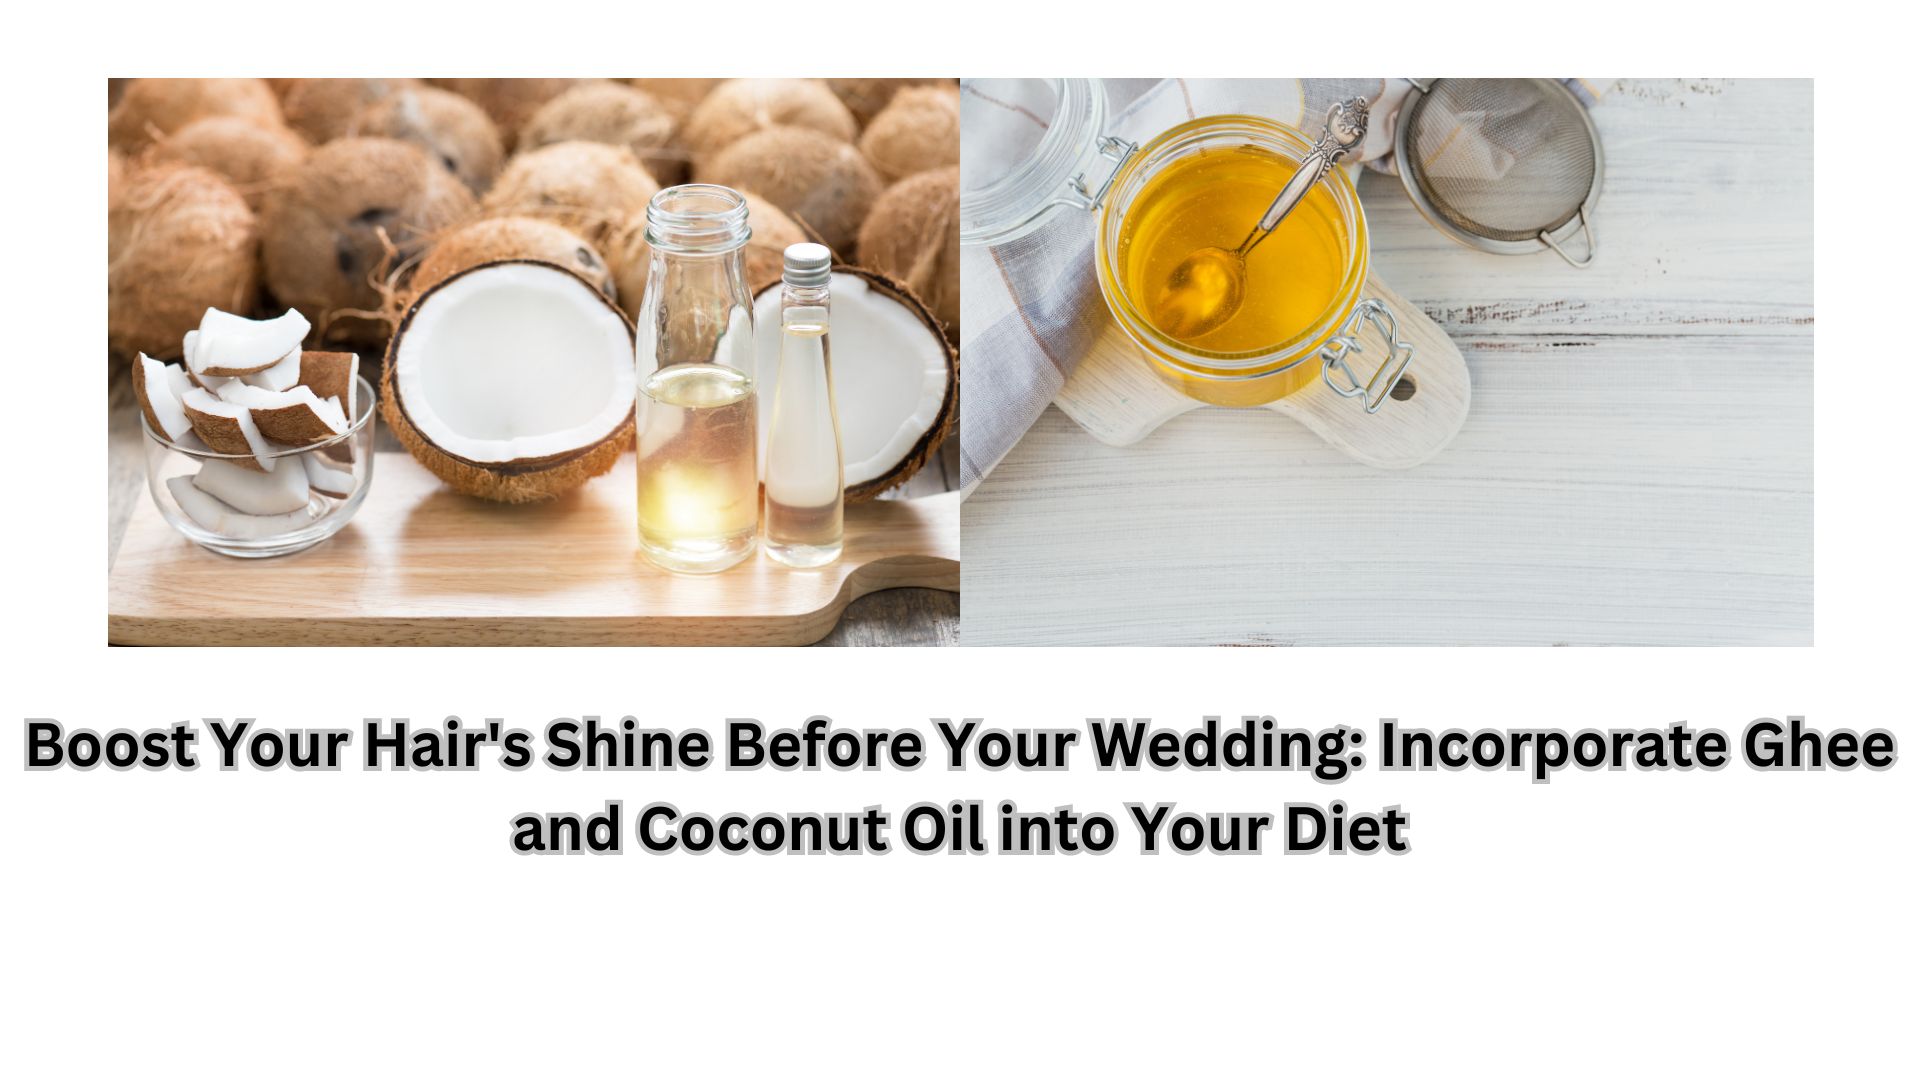 Boost Your Hair's Shine Before Your Wedding: Incorporate Ghee and Coconut Oil into Your Diet